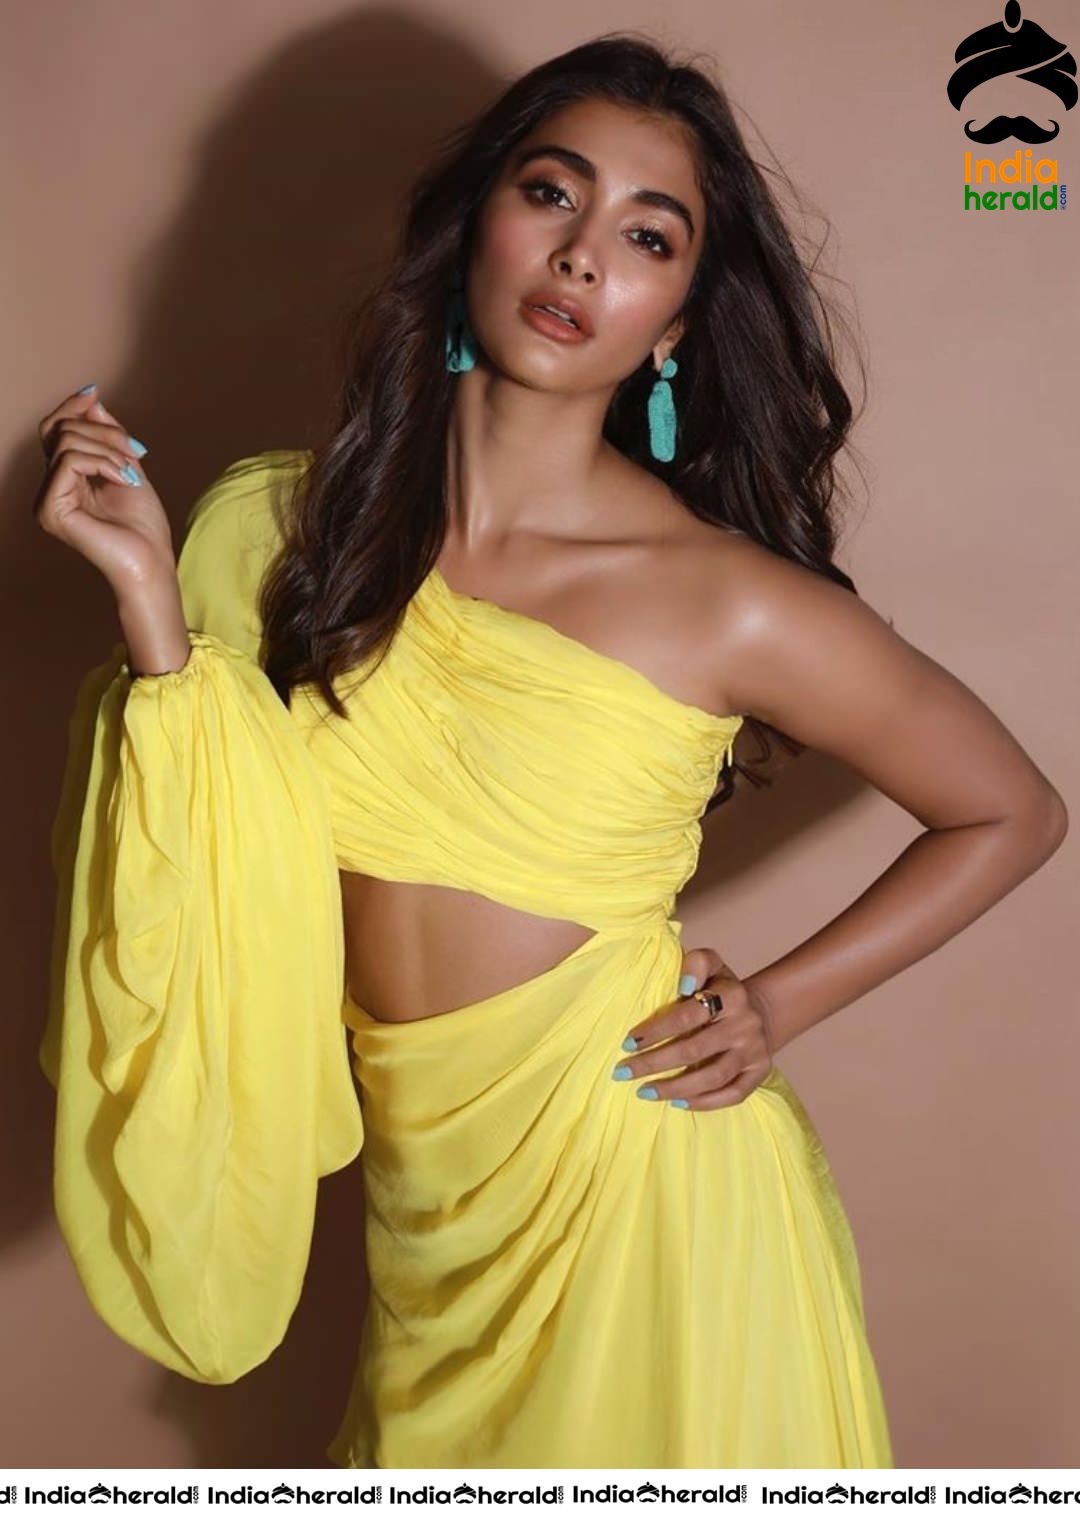 More Hot Photos from latest Photoshoot of Pooja Hegde